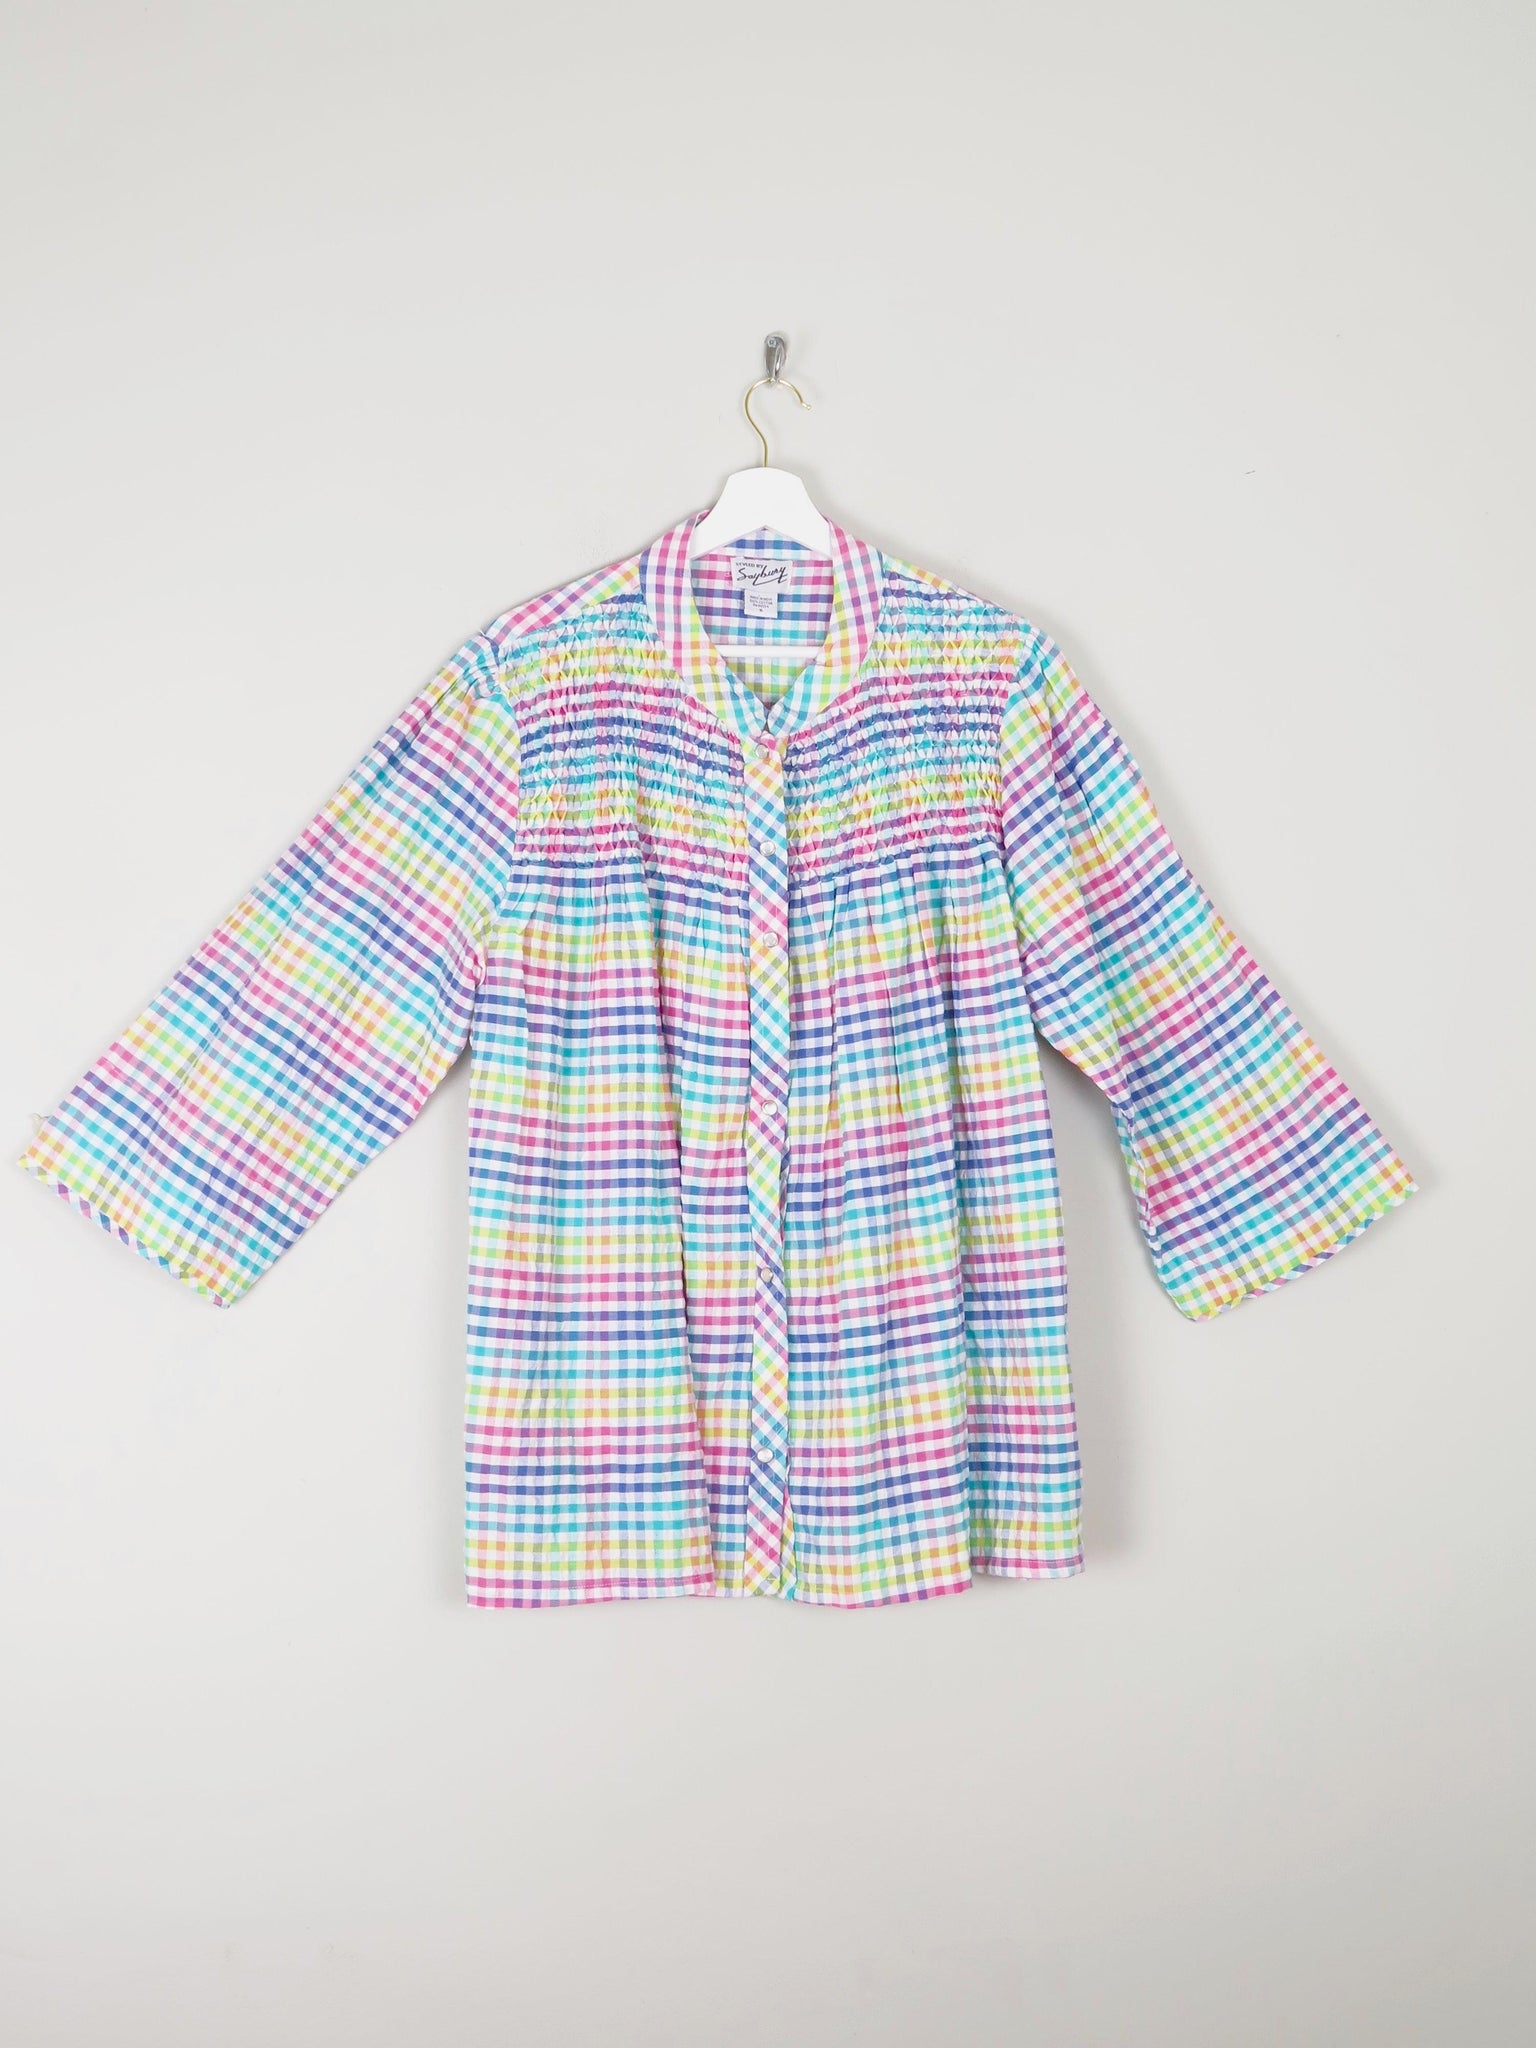 Women's Check Saybury Dead Stock Candy Coloured Jacket S/M Relaxed Fit - The Harlequin